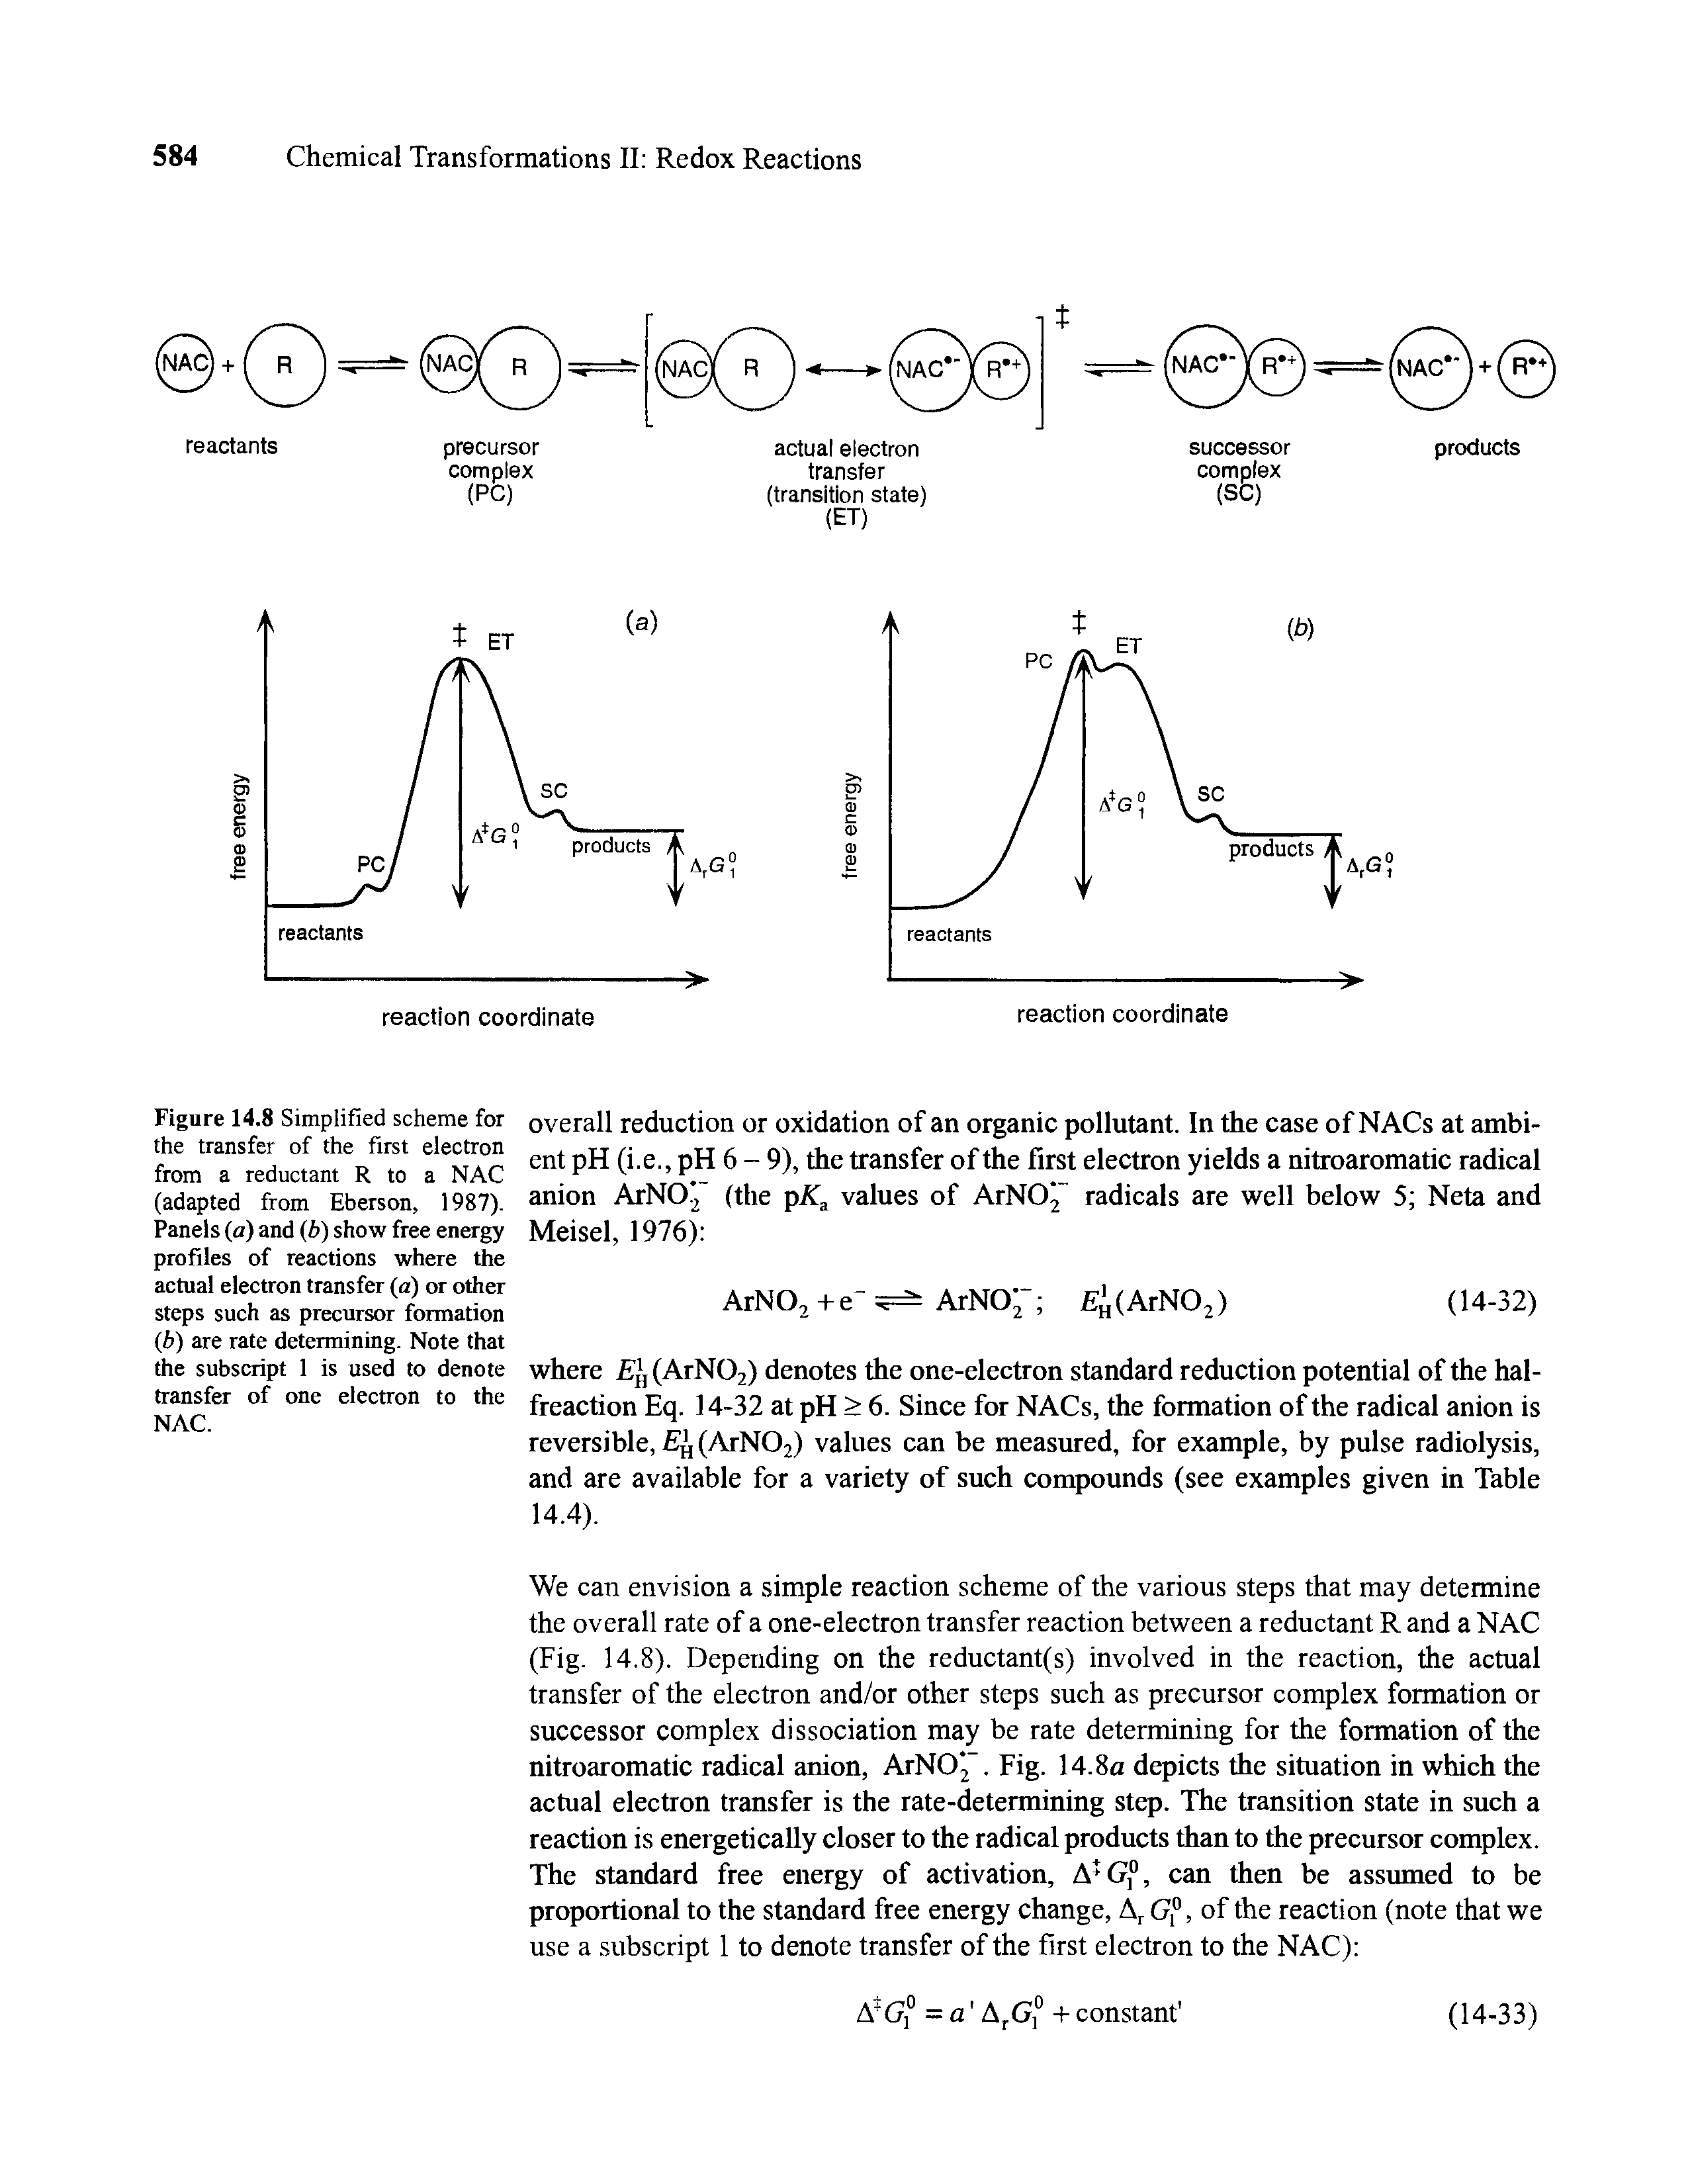 Figure 14.8 Simplified scheme for the transfer of the first electron from a reductant R to a NAC (adapted from Eberson, 1987). Panels (a) and (b) show free energy profiles of reactions where the actual electron transfer (a) or other steps such as precursor formation (b) are rate determining. Note that the subscript 1 is used to denote transfer of one electron to the NAC.